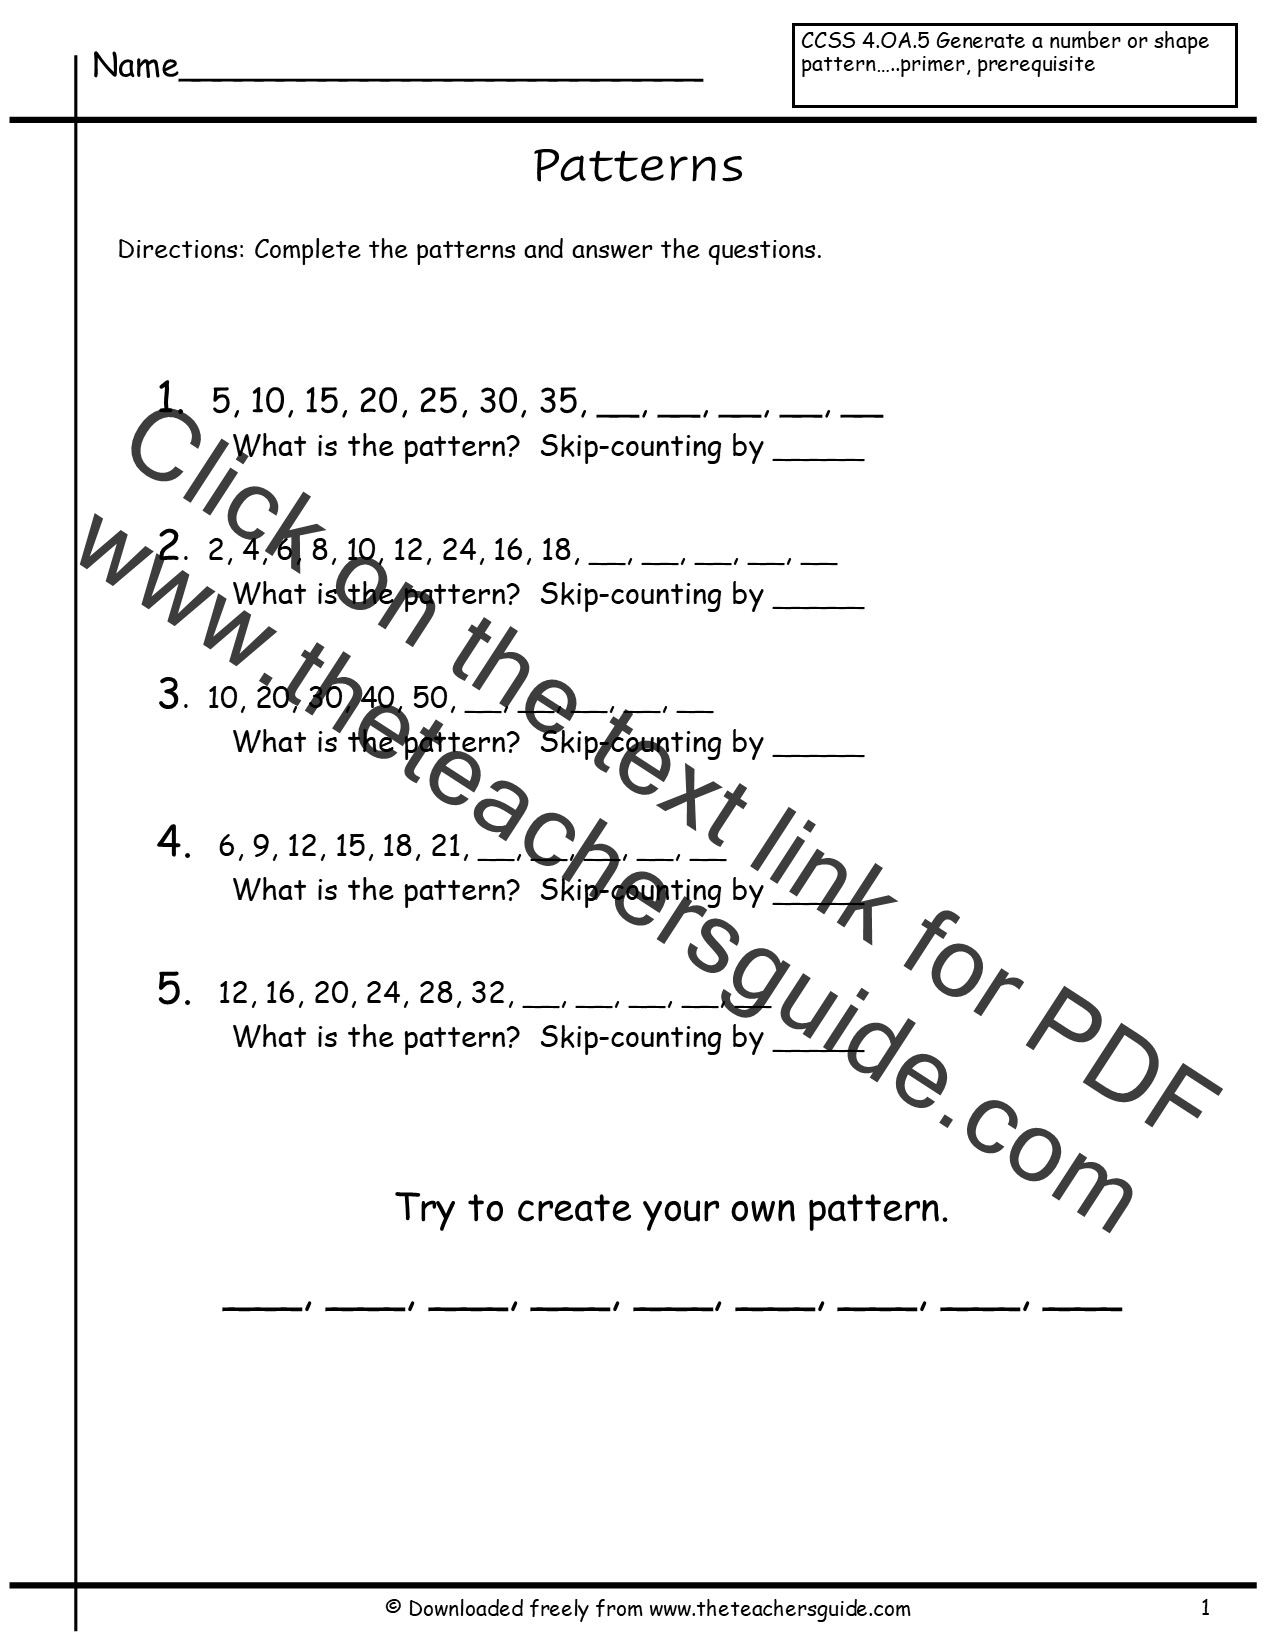 patterns-worksheets-from-the-teacher-s-guide